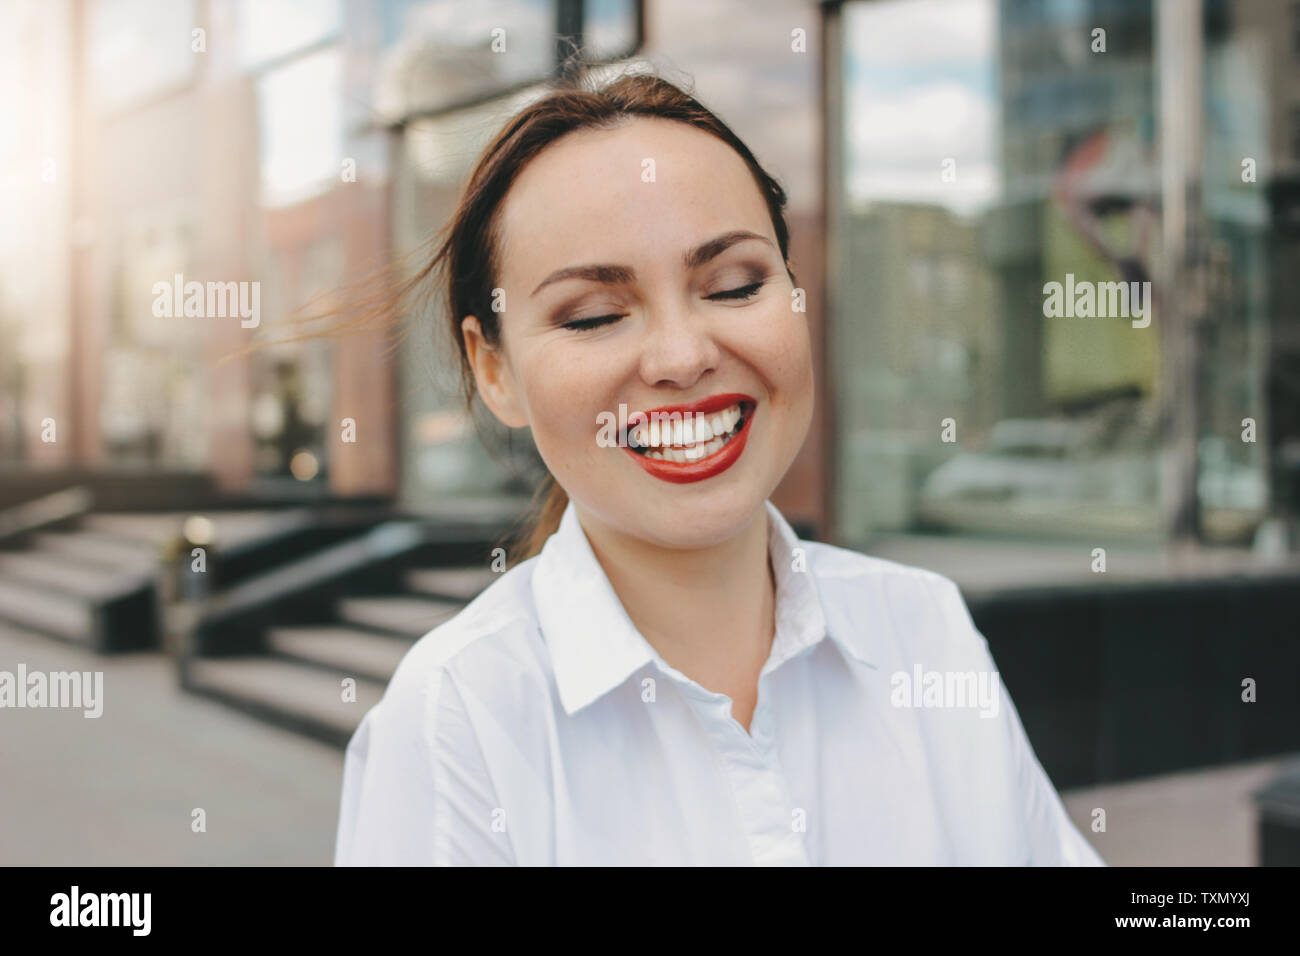 Close Up Portrait Of Happy Brunette Elegant Woman Business Lady In White Shirt At The City